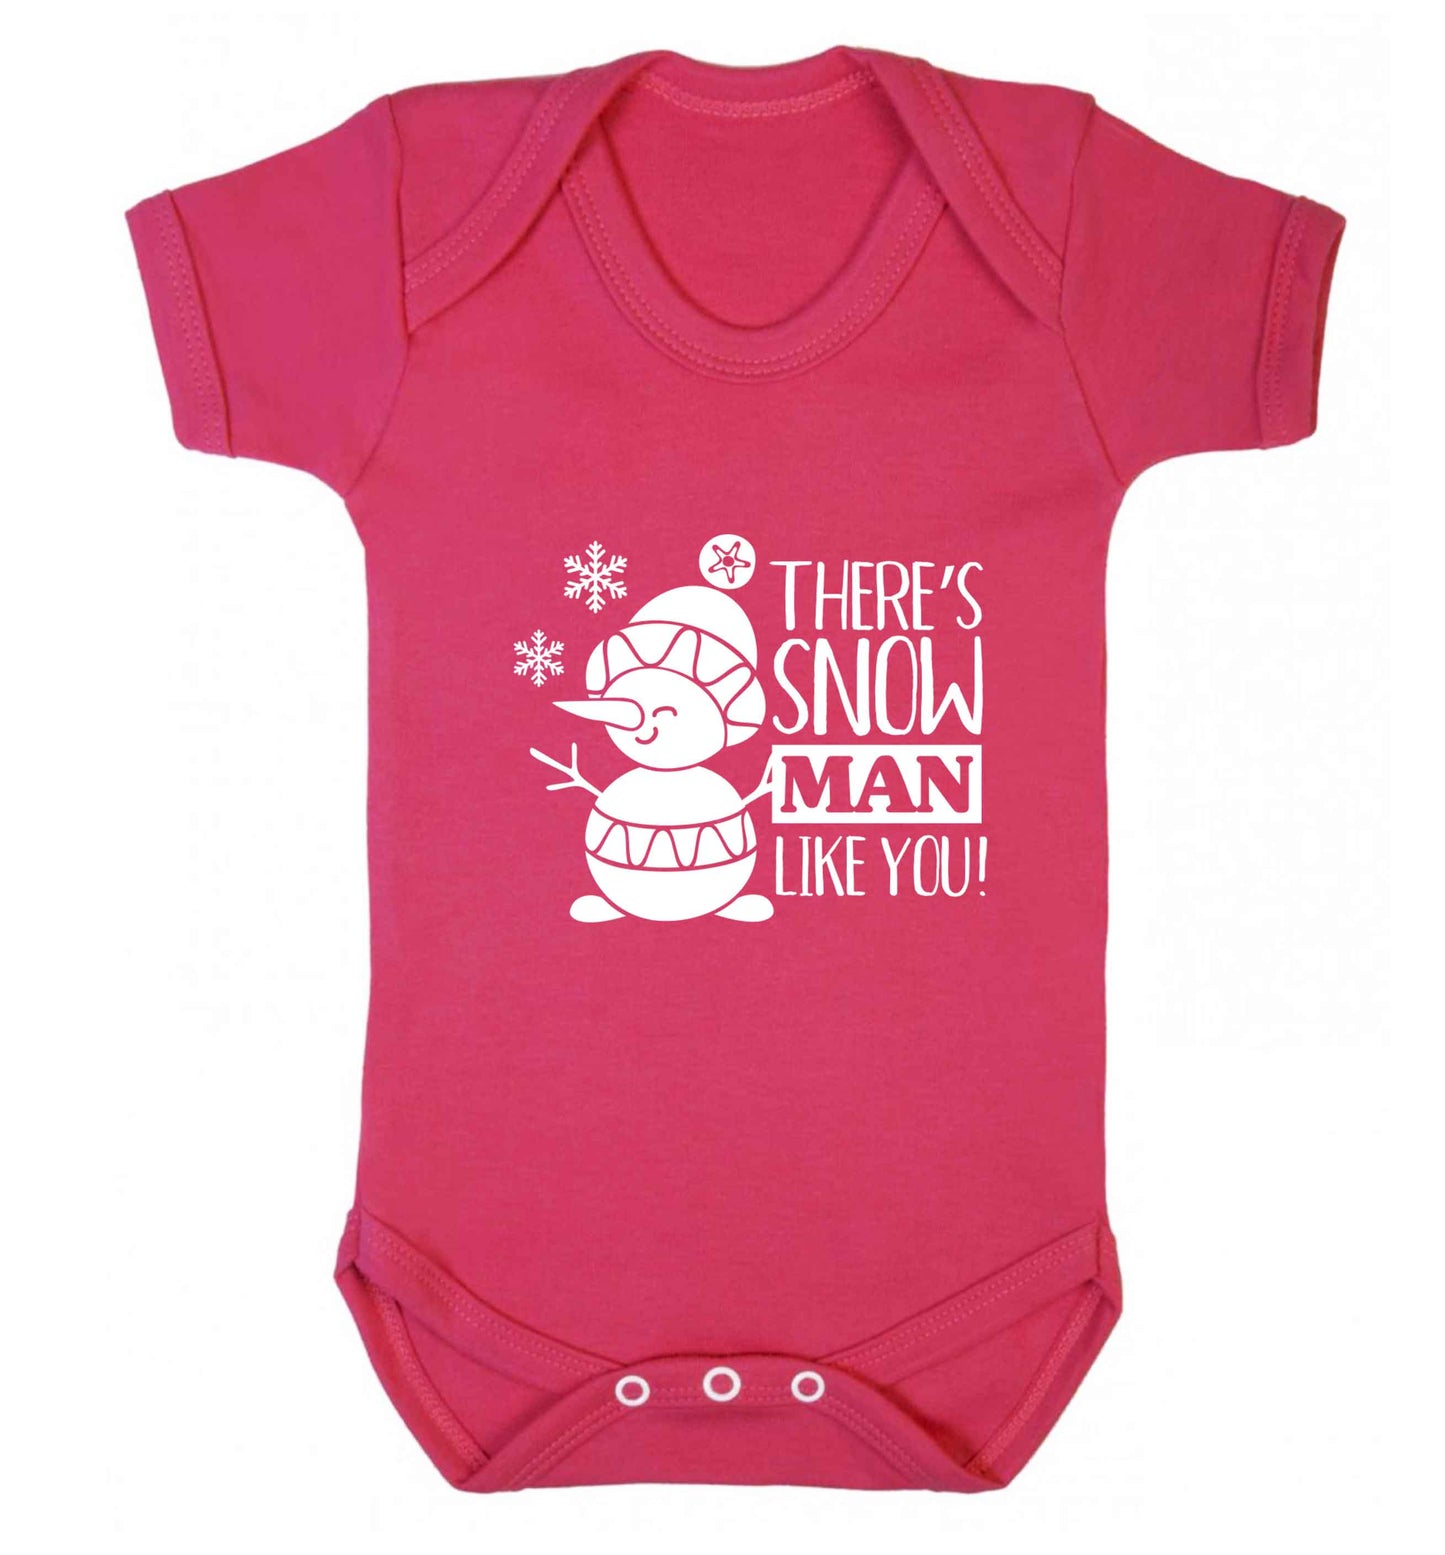 There's snow man like you baby vest dark pink 18-24 months